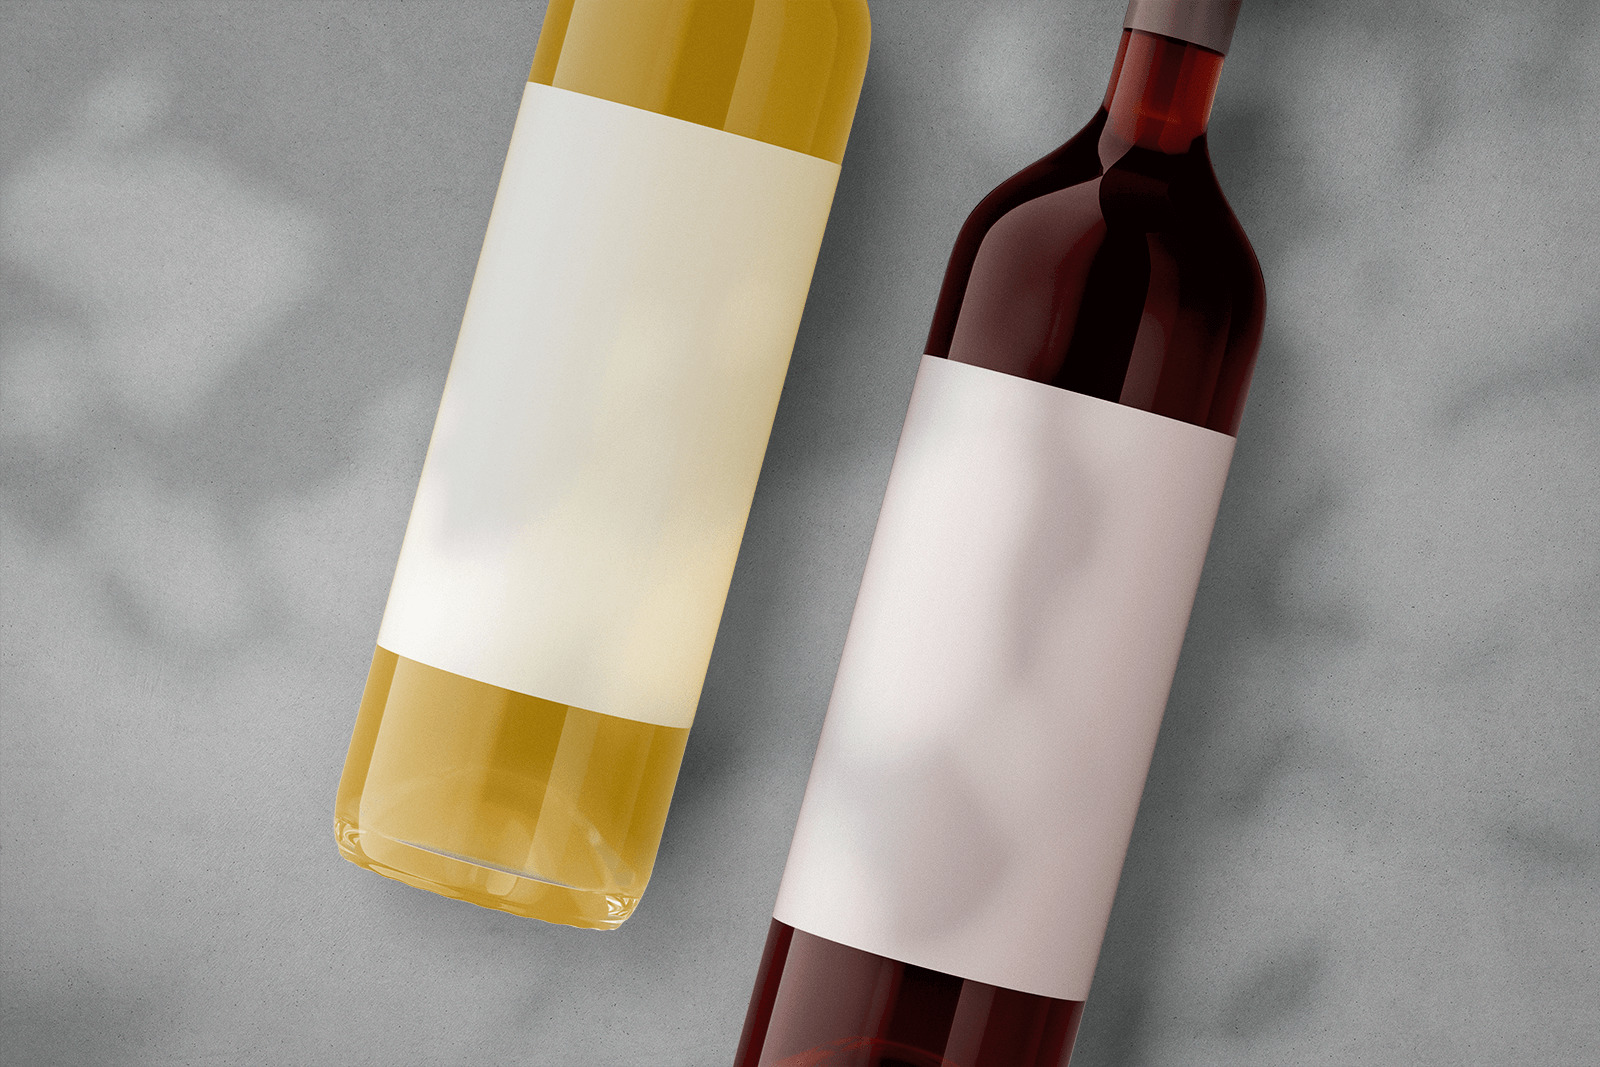 Free Red and White Wine Bottles Mockup